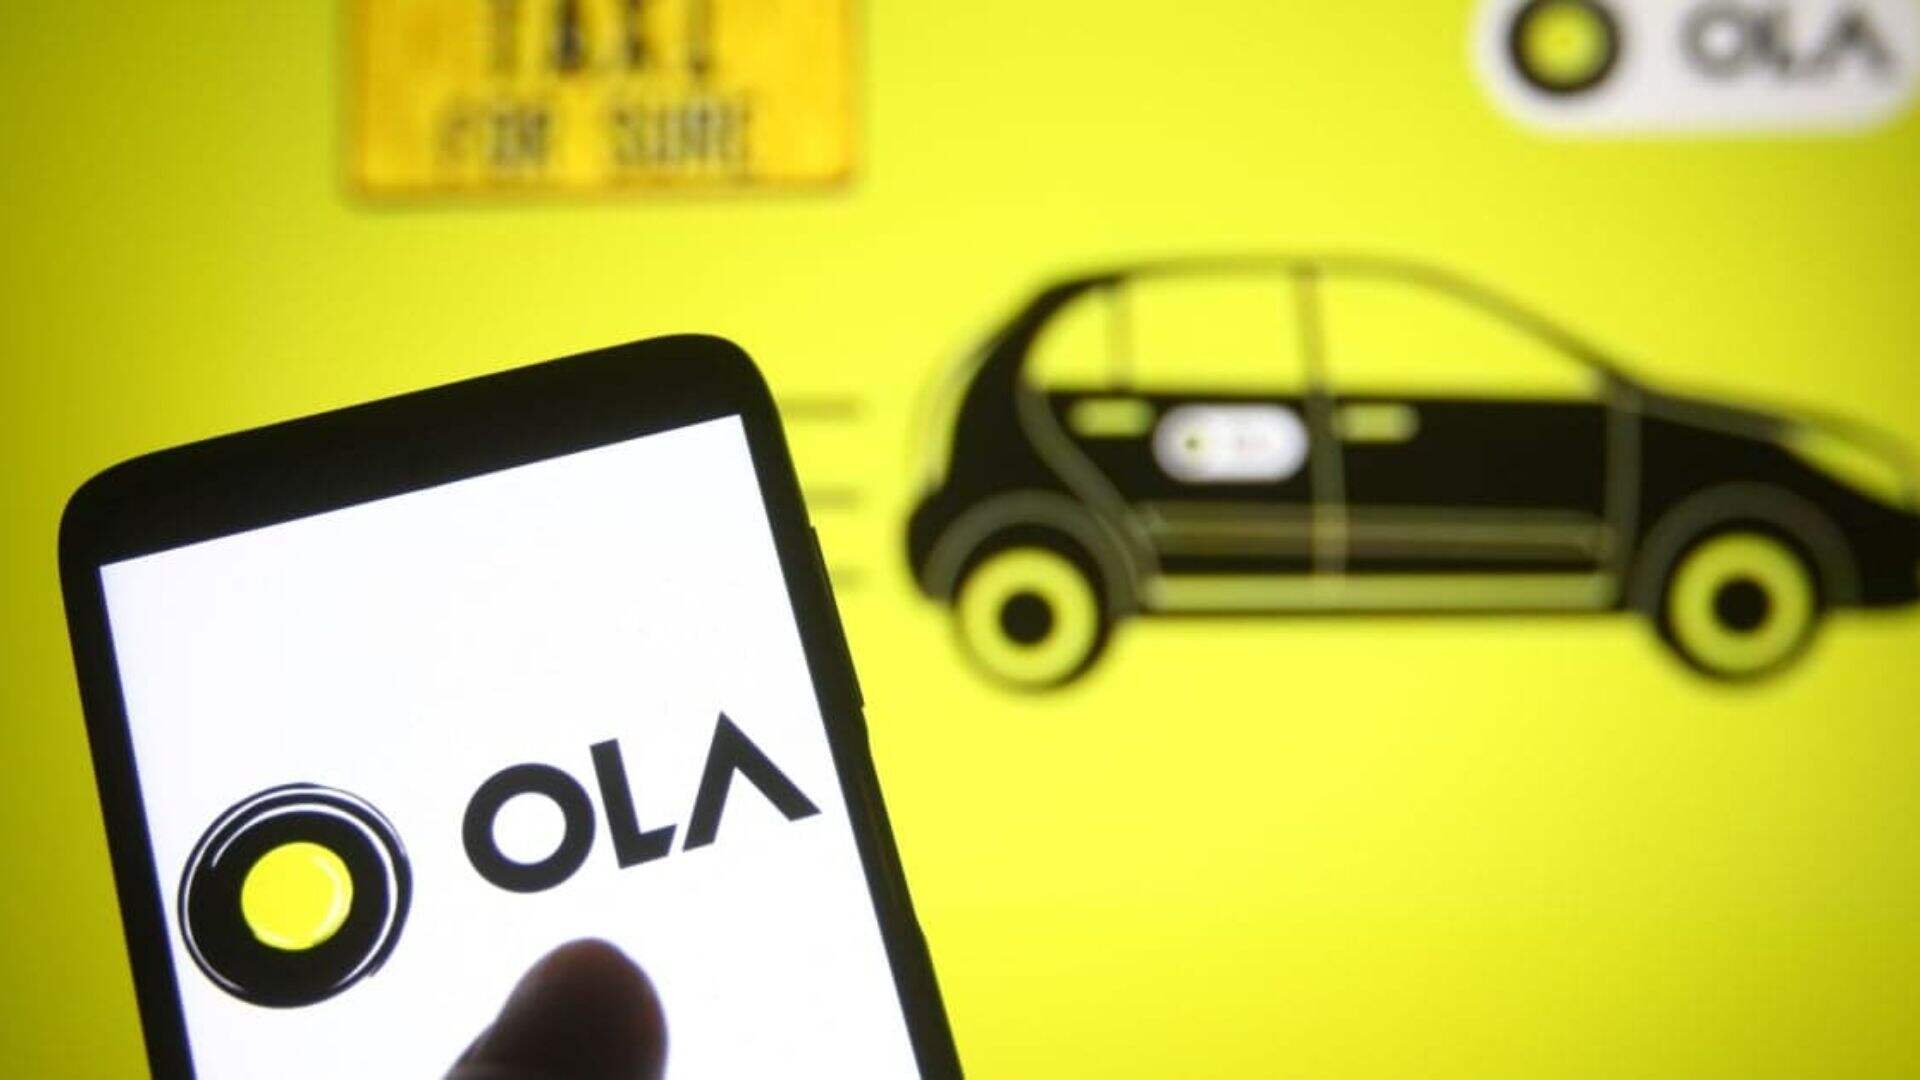 Cab-Riding Giant Ola Leaves Google Maps, Shifts Its Operation To Homegrown Ola Maps